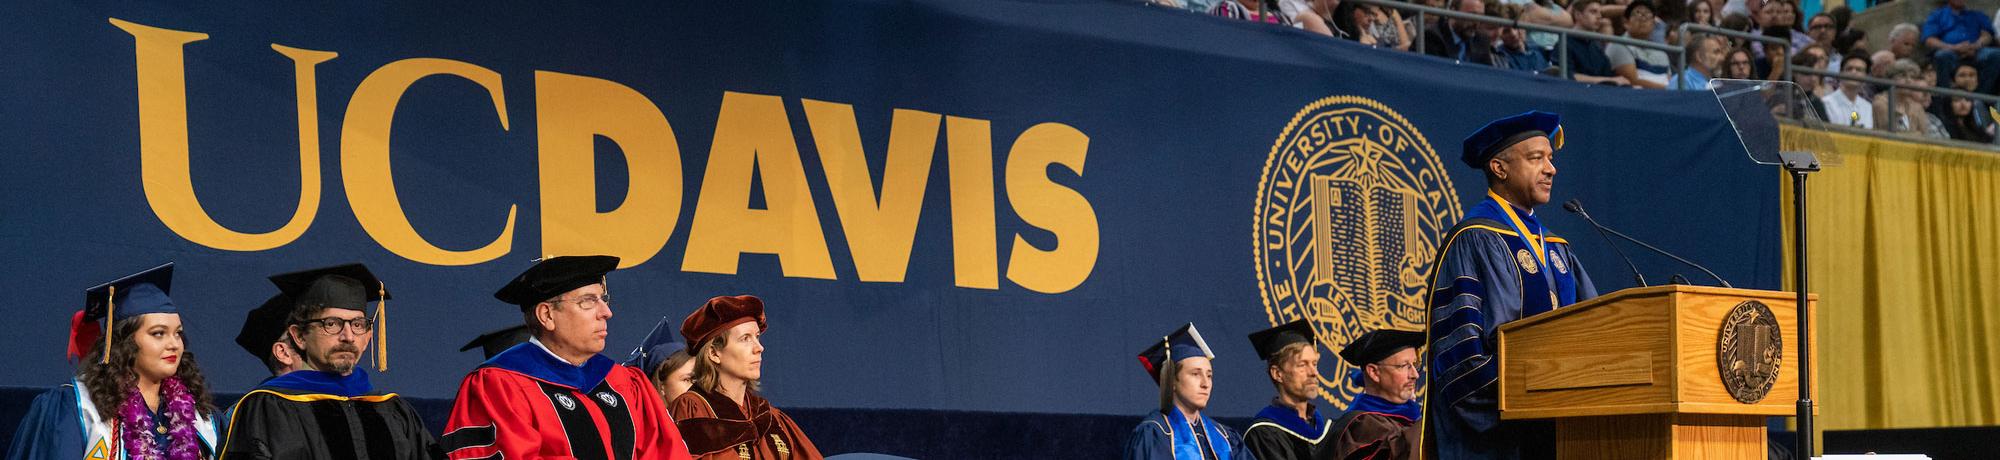 Gary May speaking at Commencement with a large UC Davis logo in the background